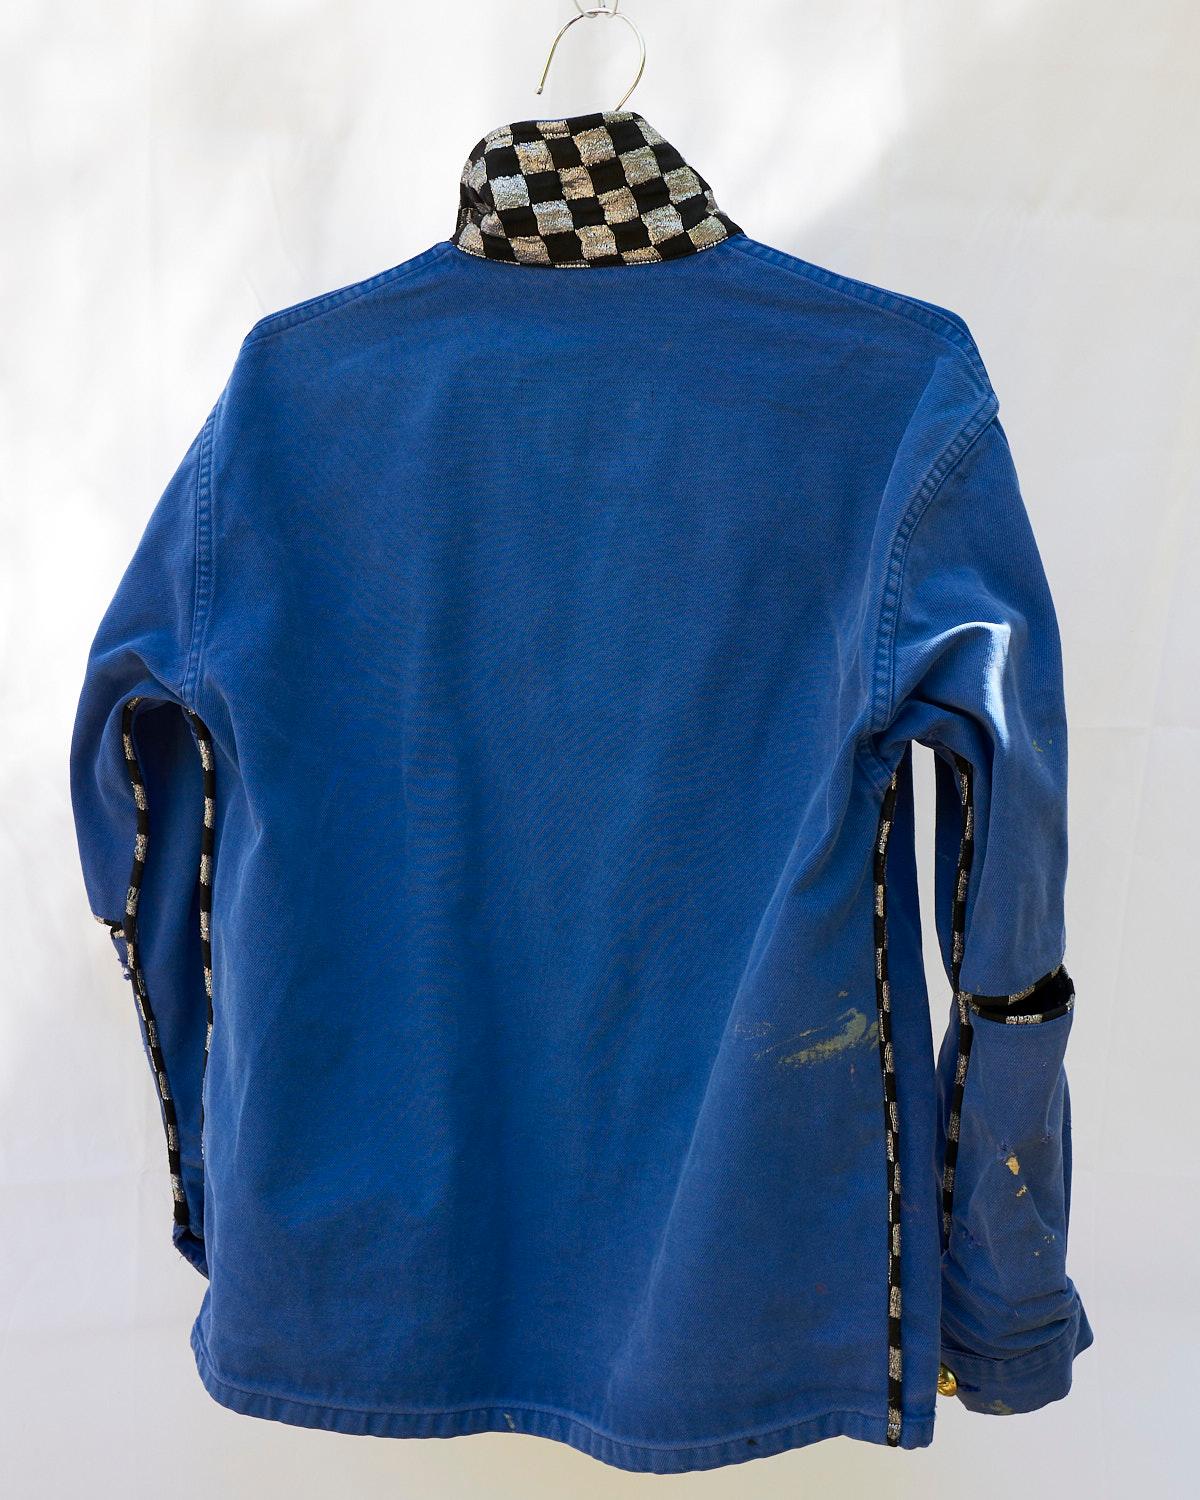 Jacket Distressed Collectible French Blue J Dauphin 4